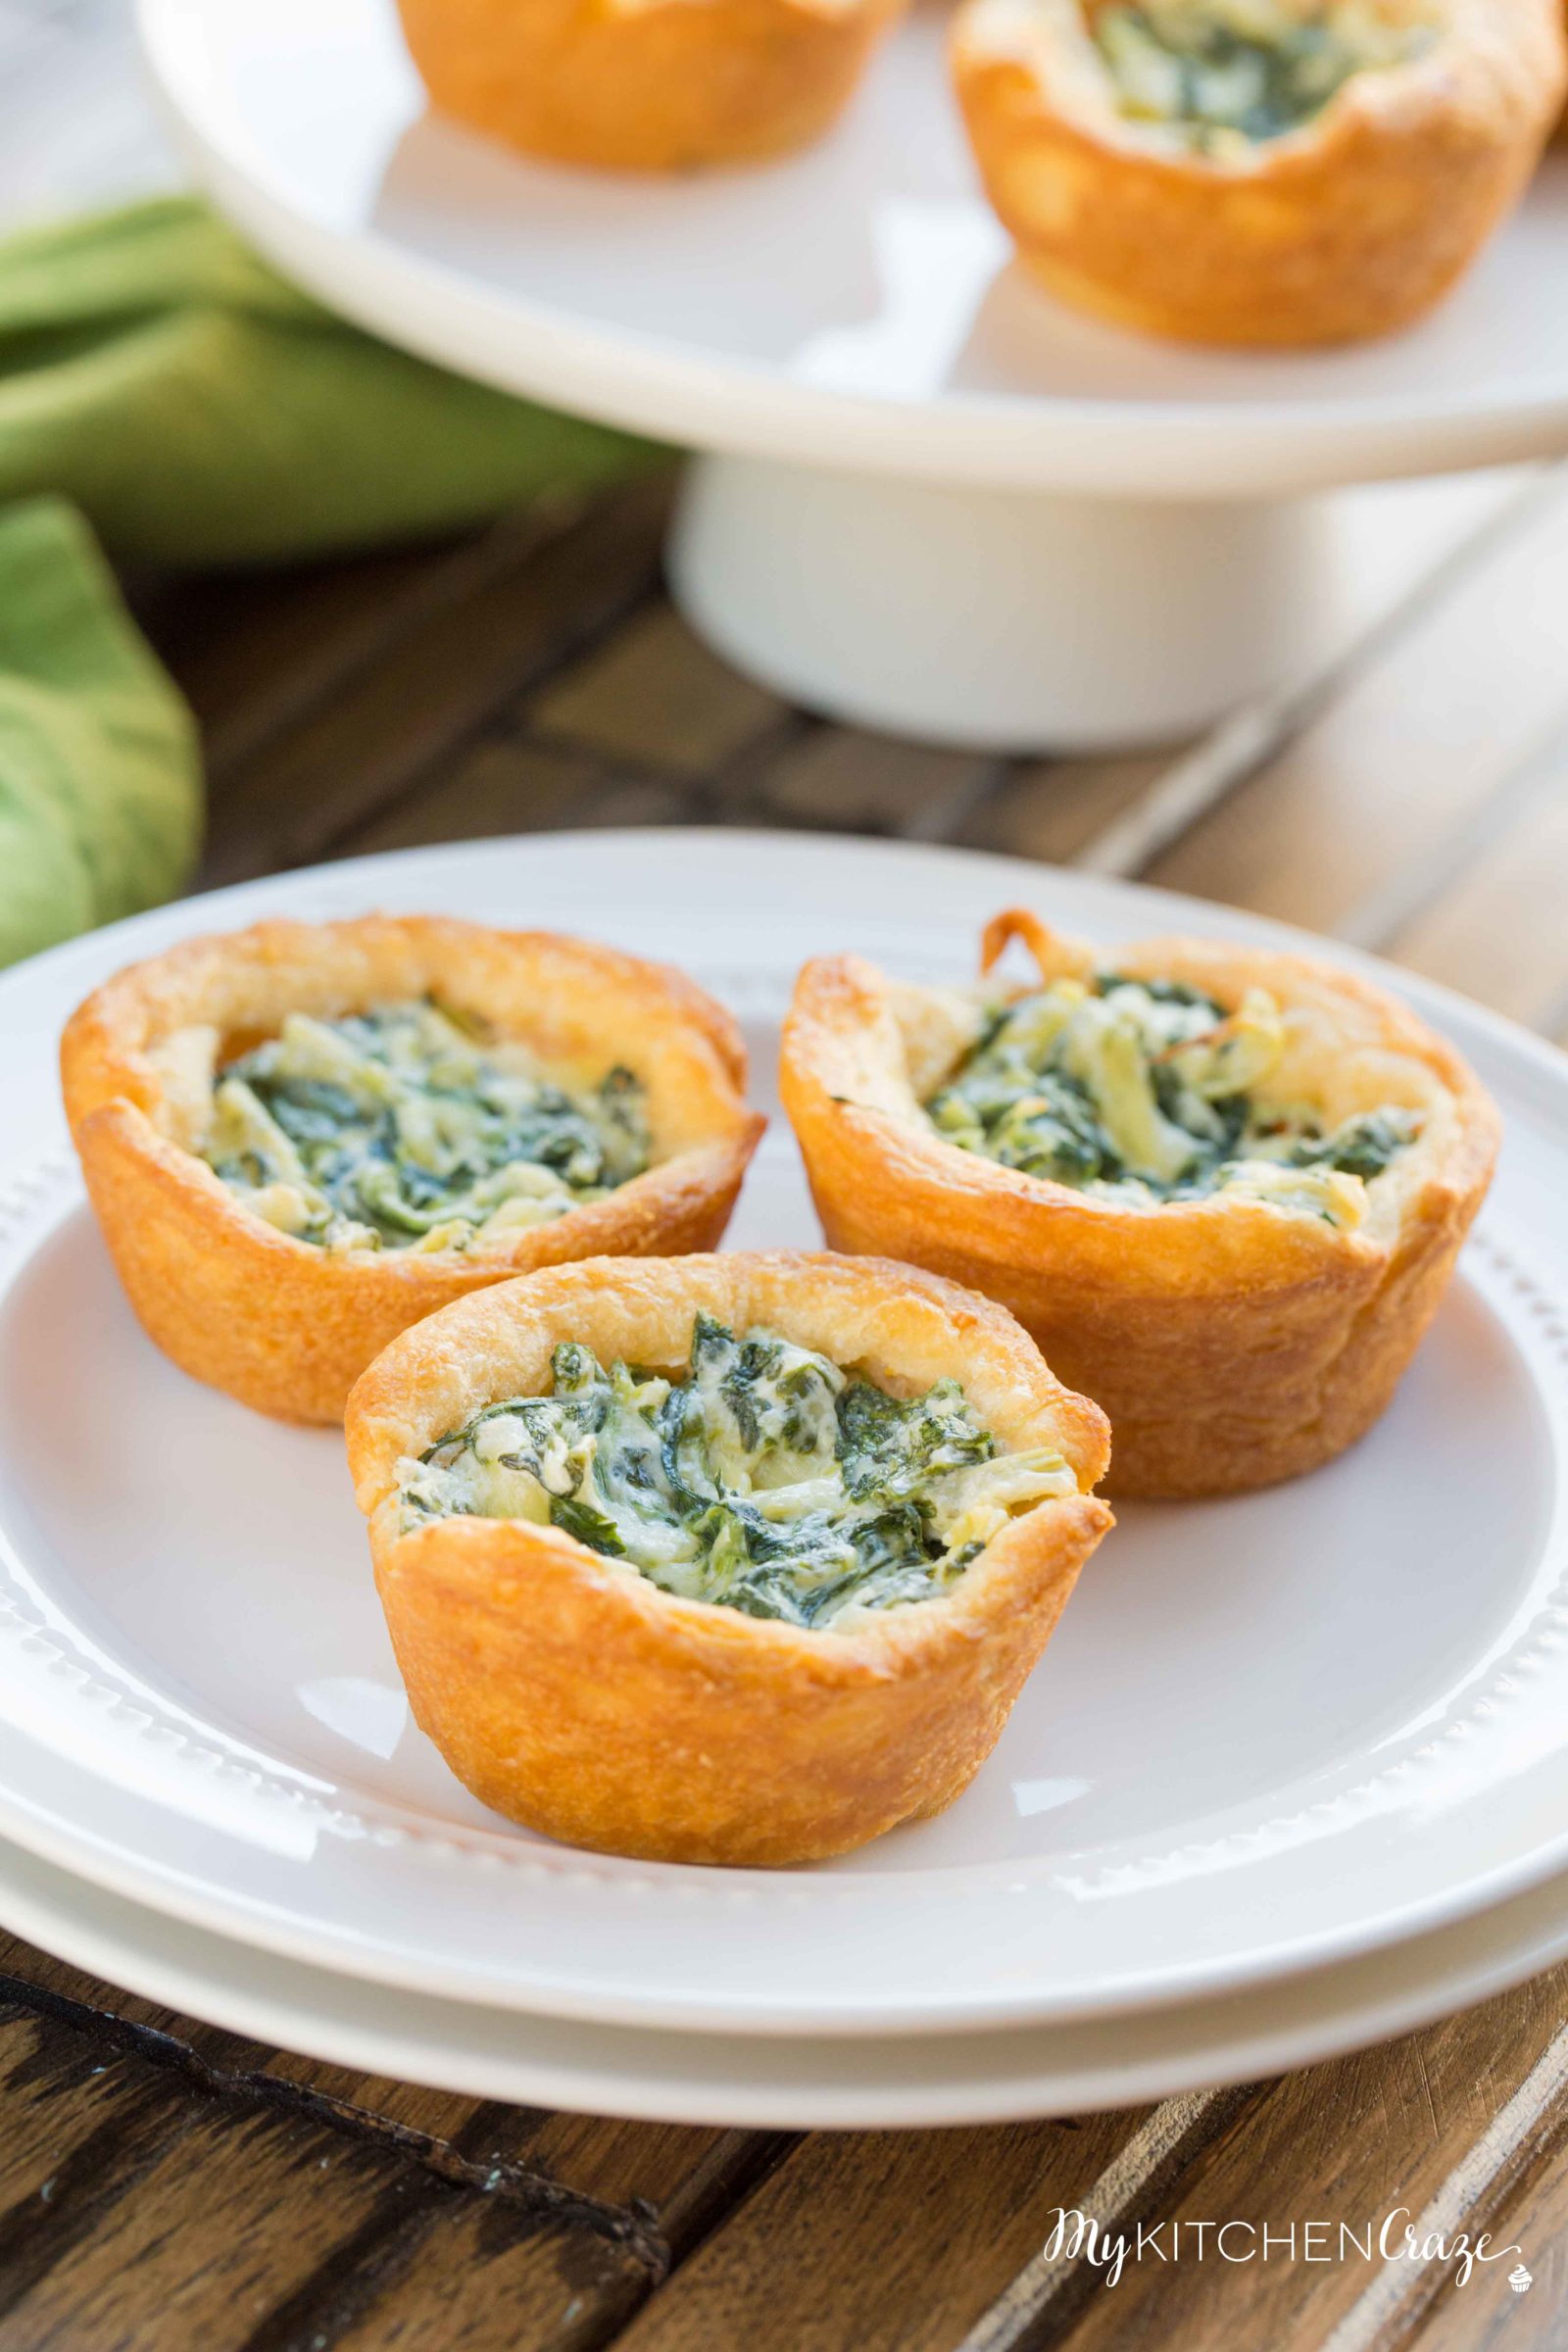 Spinach Artichoke Cups ~ mykitchencraze.com ~ This appetizer is perfect for any potlucks or parties. They take no time at all to make and taste delicious. Your guest won't be able to eat just one!